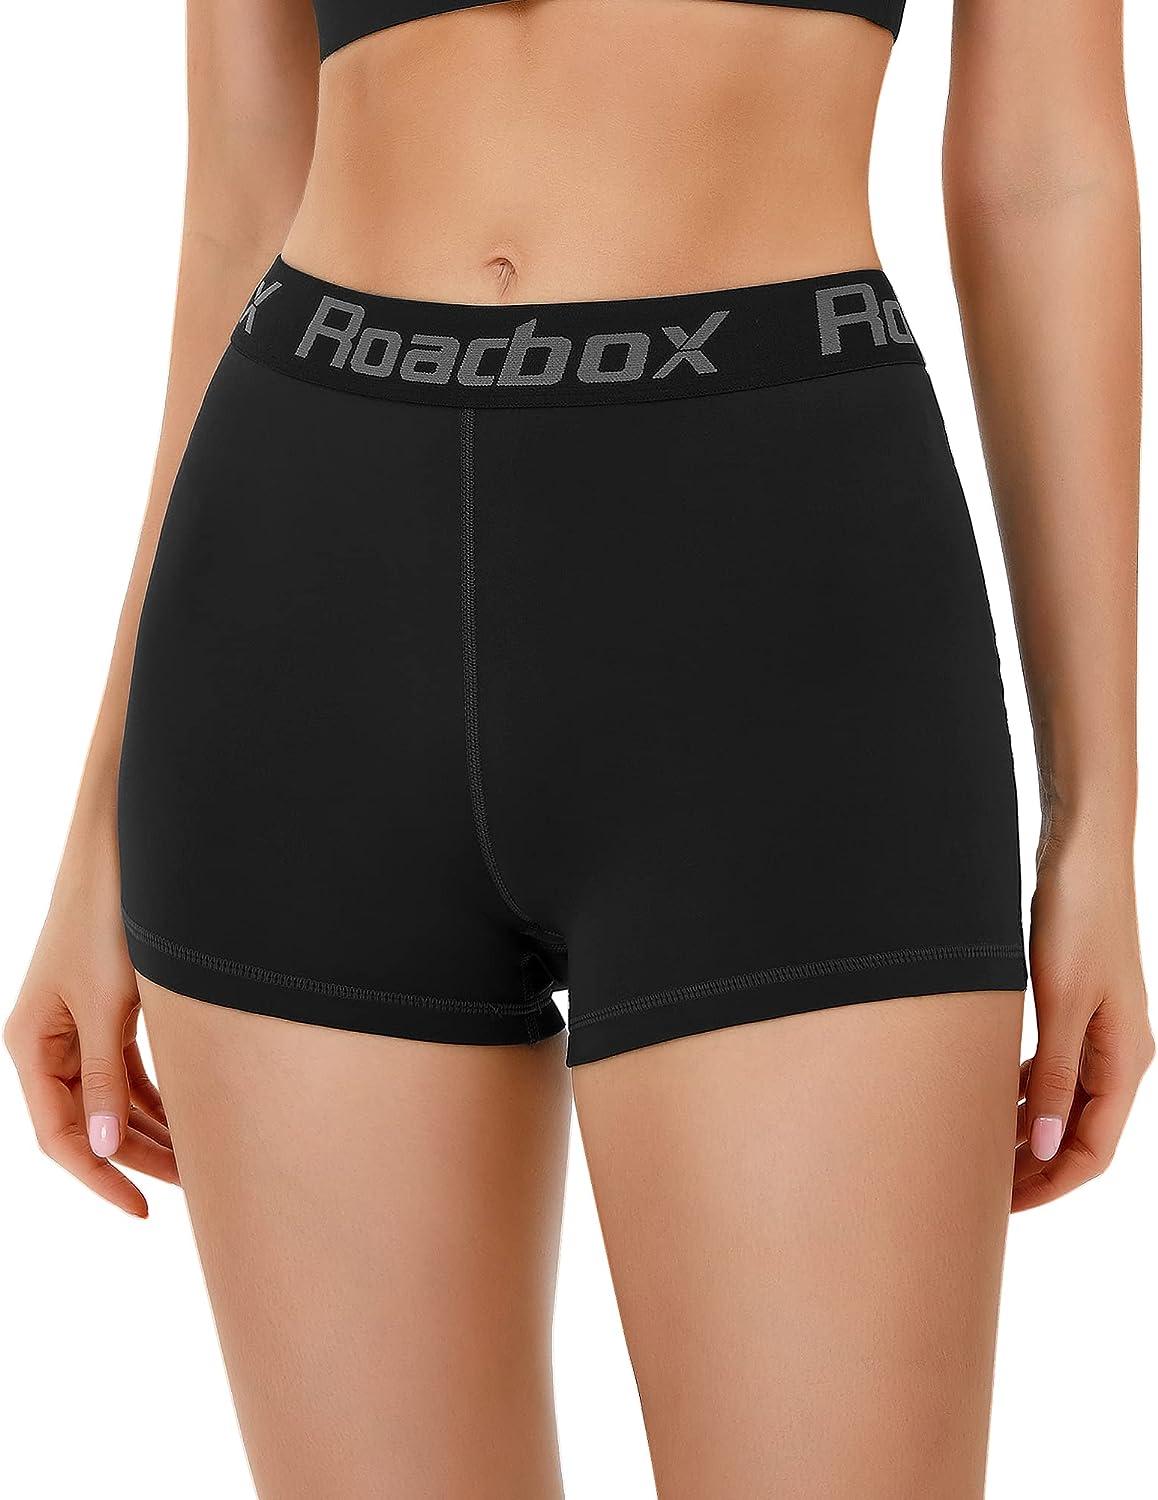  Roadbox Compression Shorts for Men with Perfect Pocket